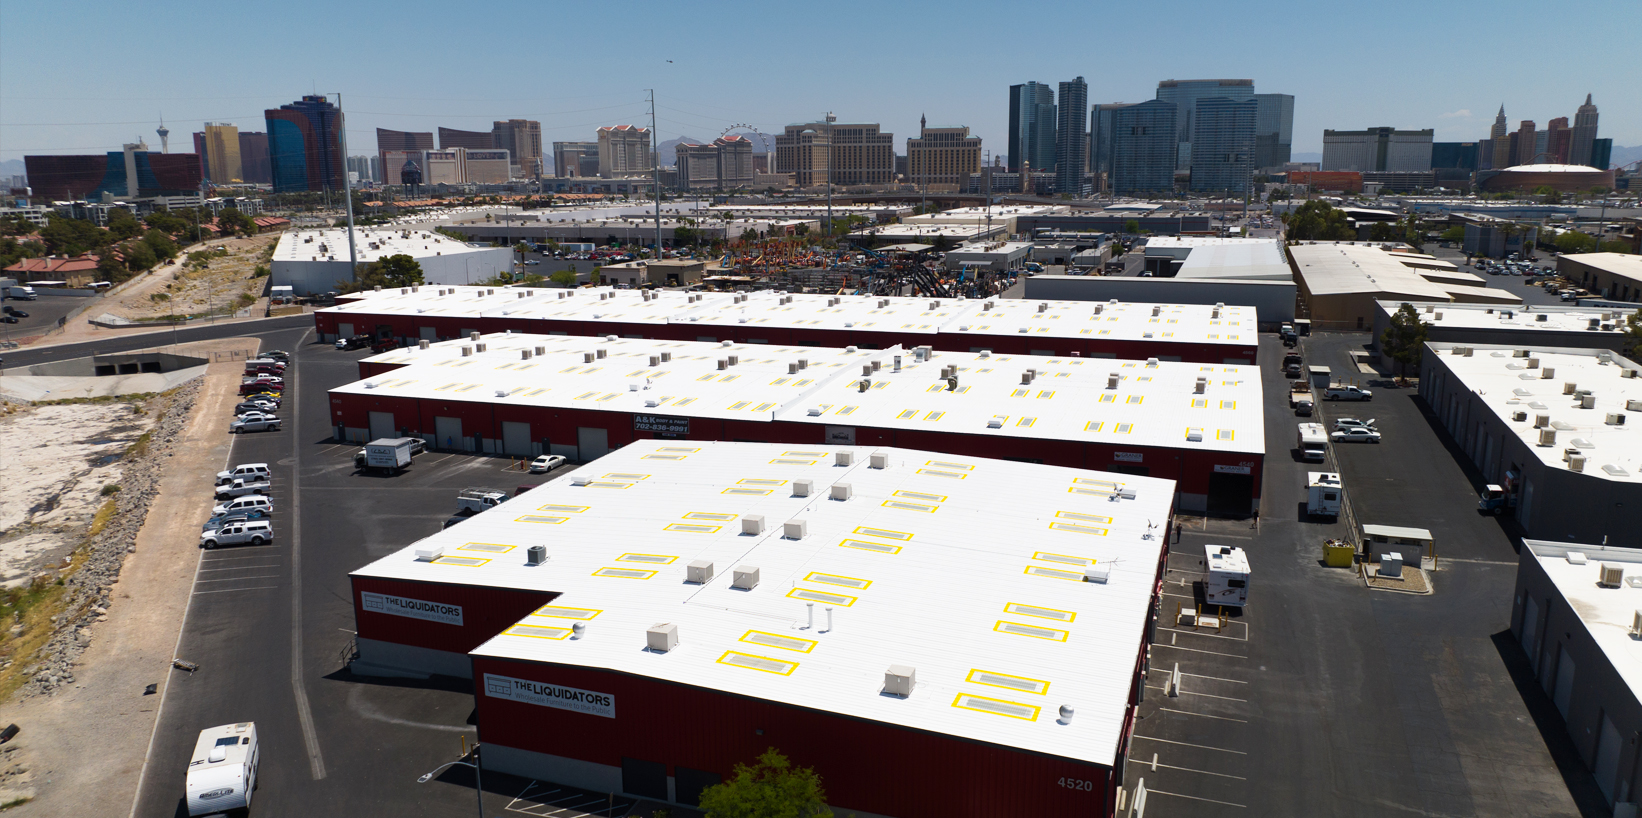 Aerial view of several large industrial warehouses with white rooftops labeled "Solo Cup Co." in a busy urban area with high-rise buildings in the background.